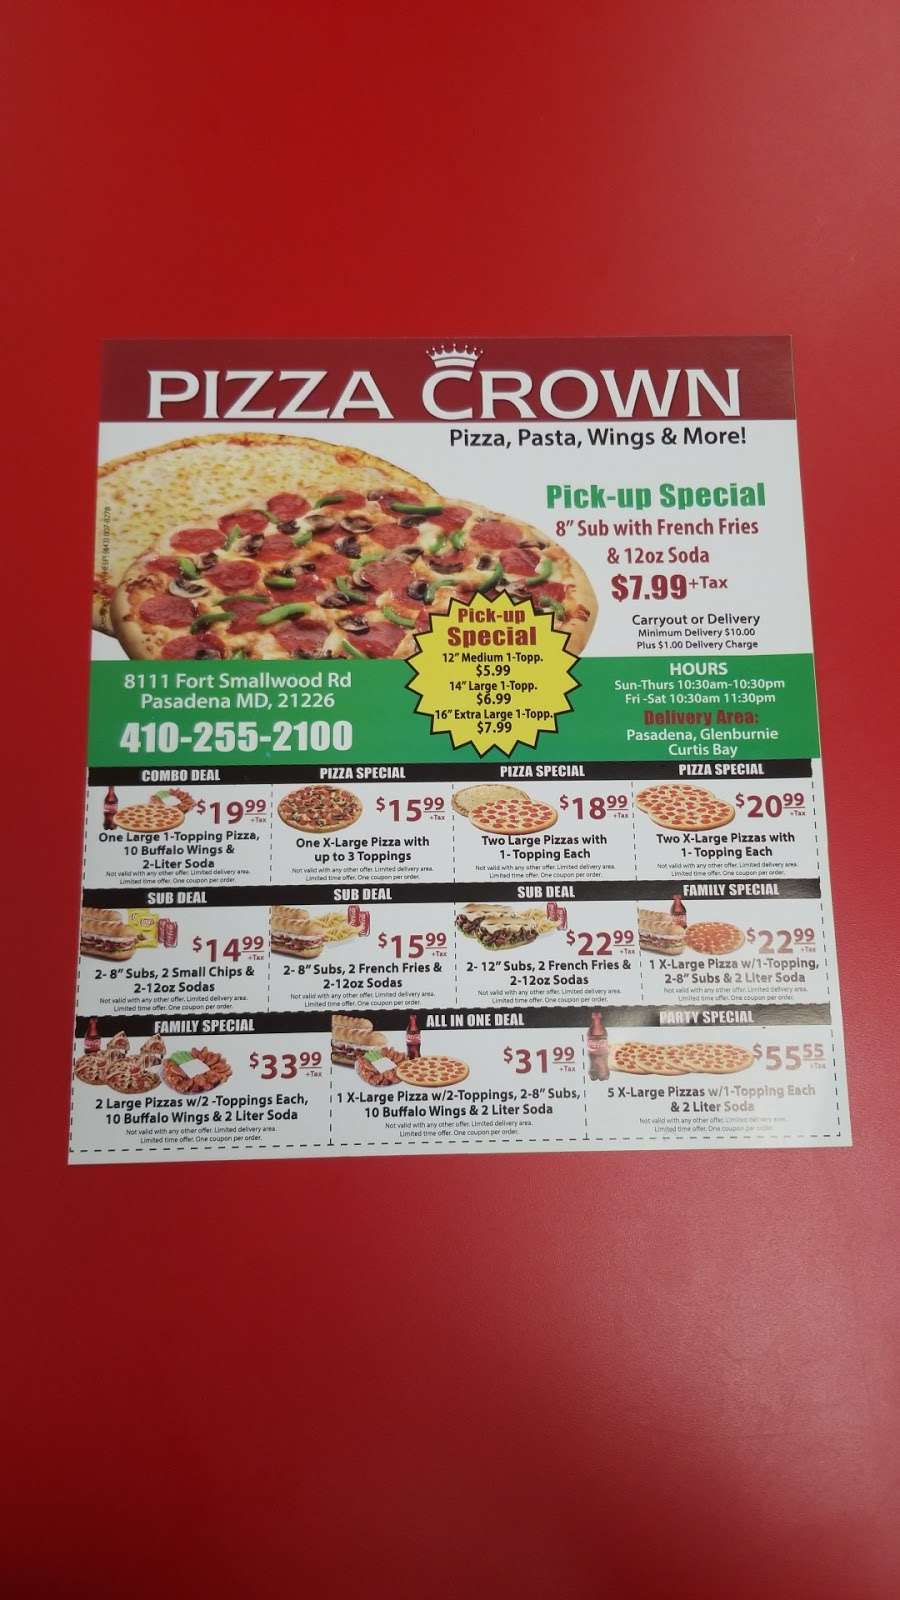 Pizza Crown | 8111 Fort Smallwood Rd, Curtis Bay, MD 21226 | Phone: (410) 255-2100